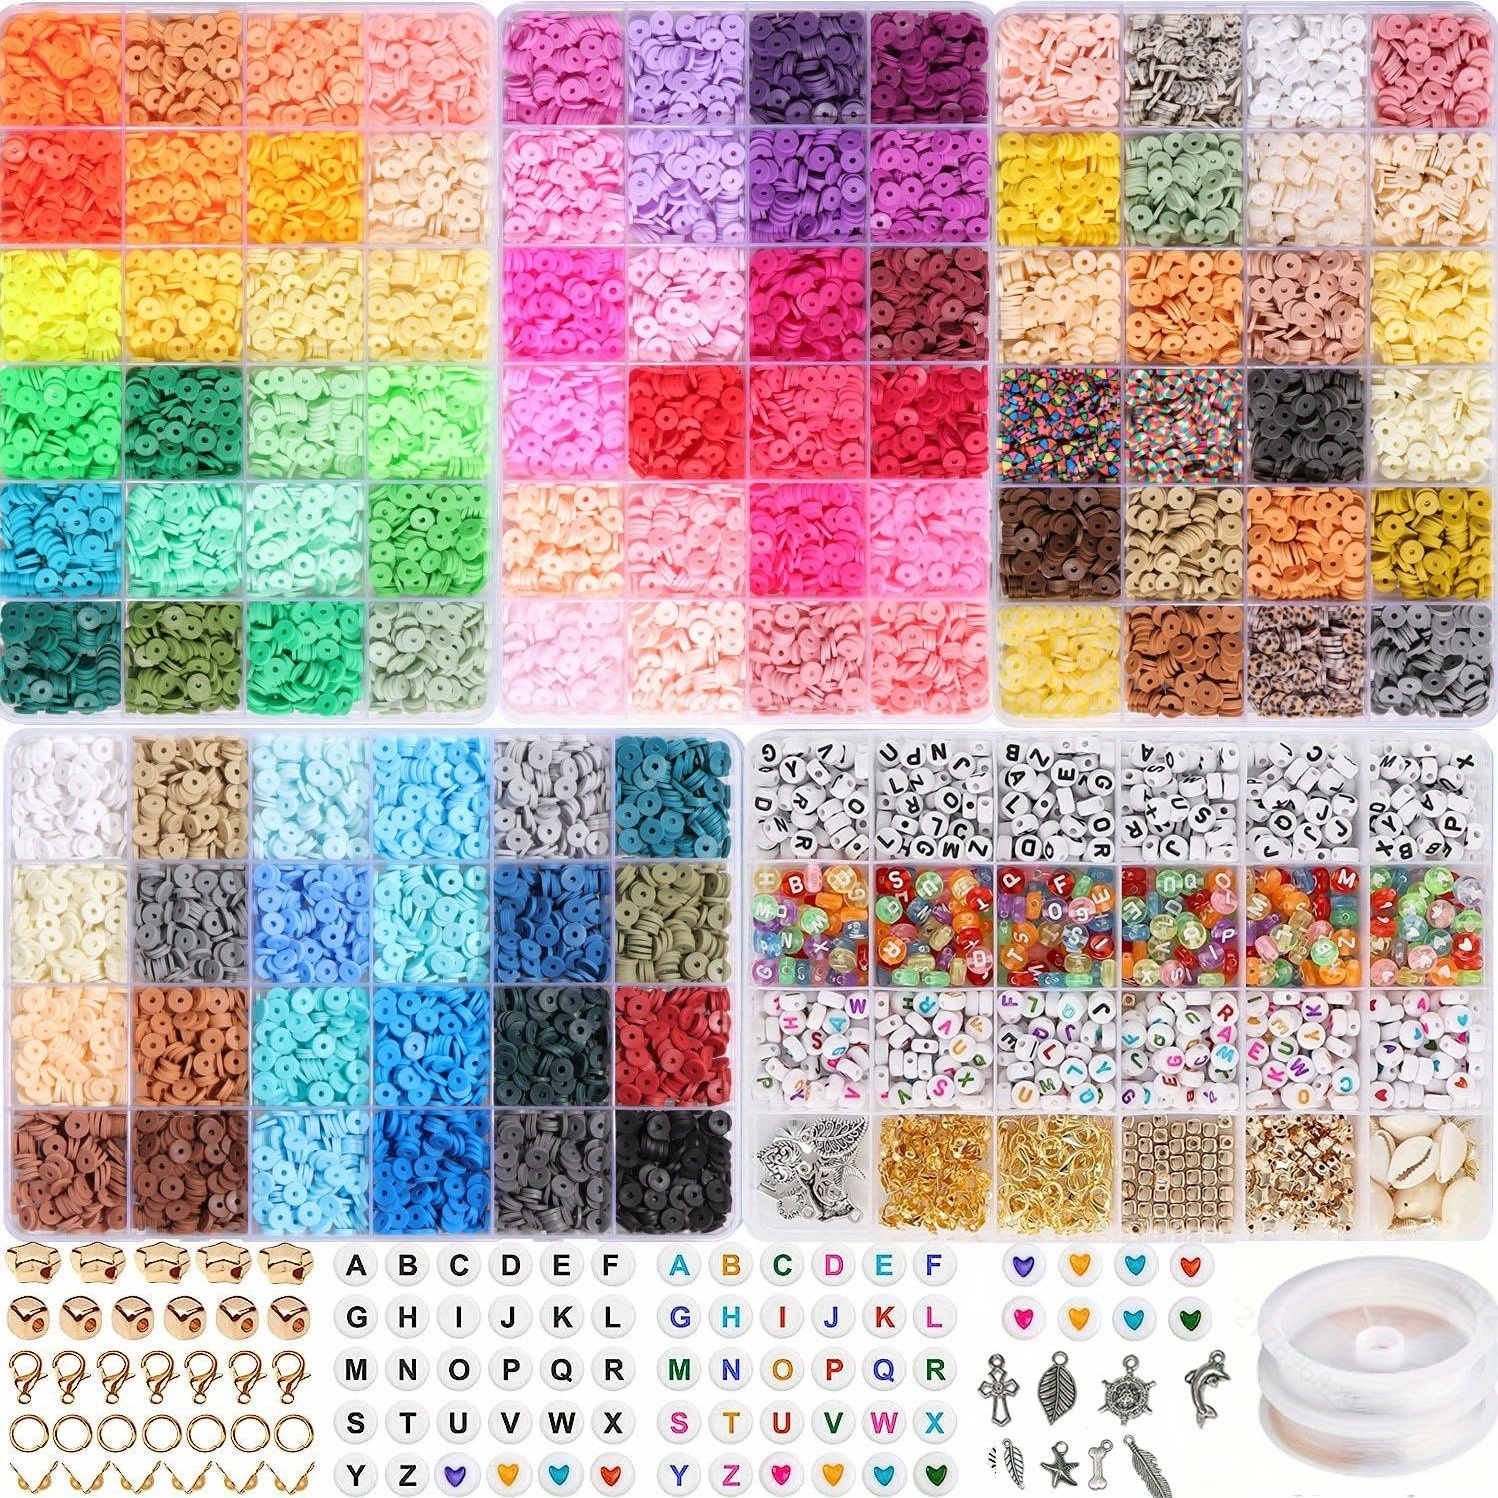 4800pcs Clay Beads for Bracelet Making Kit, 48 Colors Flat Round